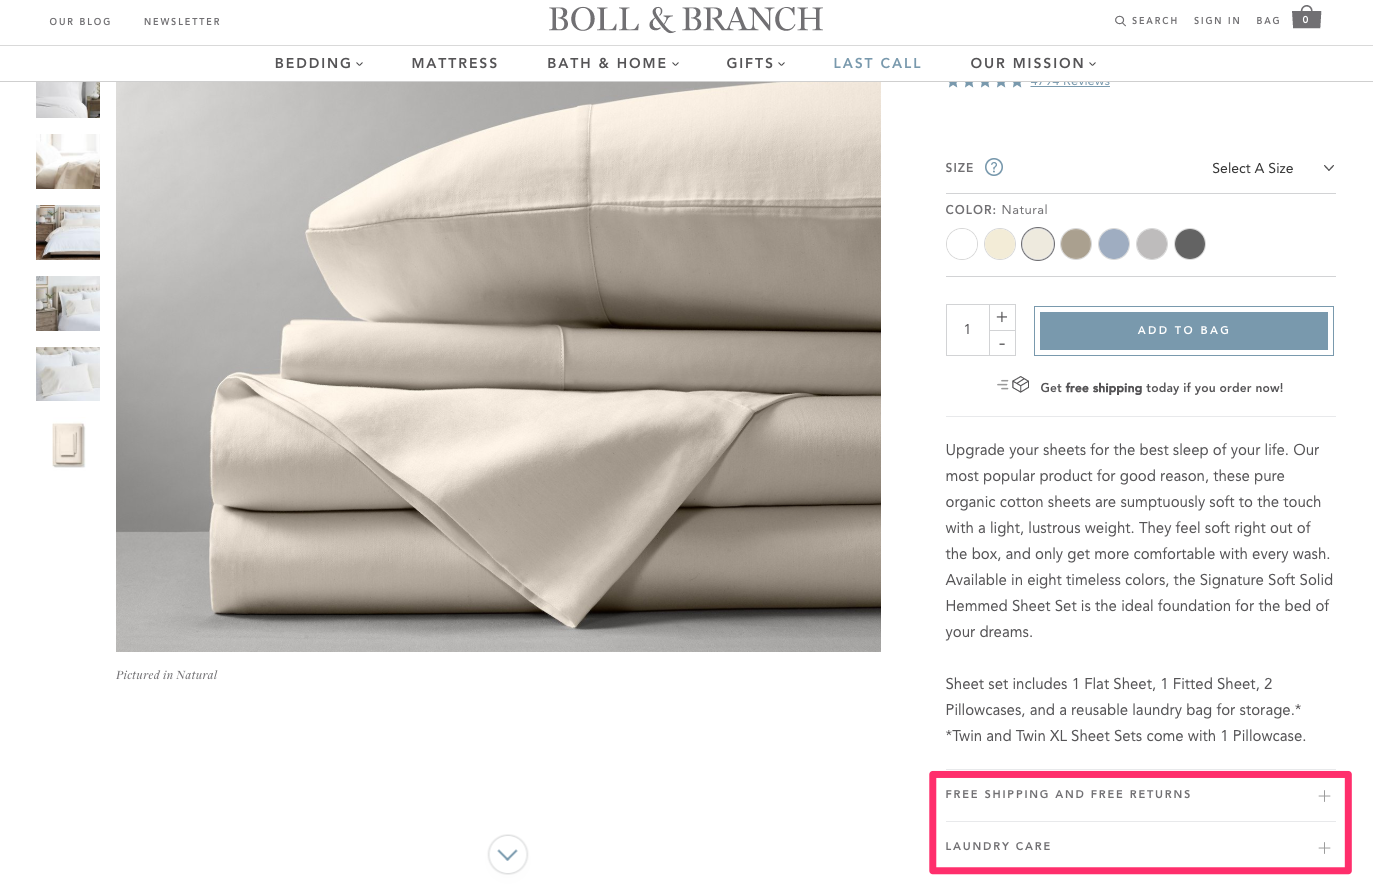 Boll and Branch uses accordions to keep supplementals details hidden on their product page.